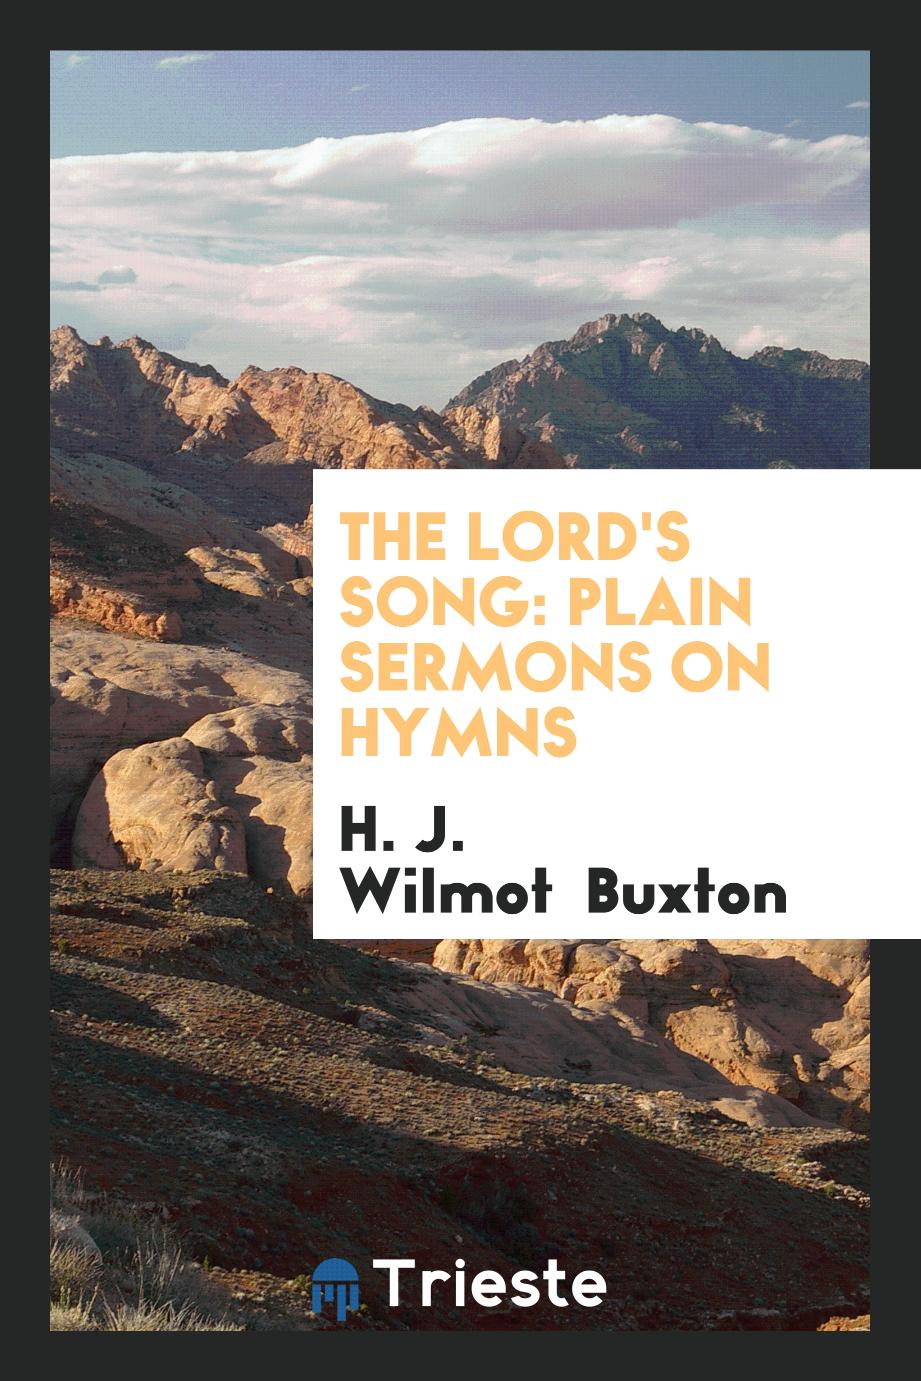 The Lord's Song: Plain Sermons on Hymns